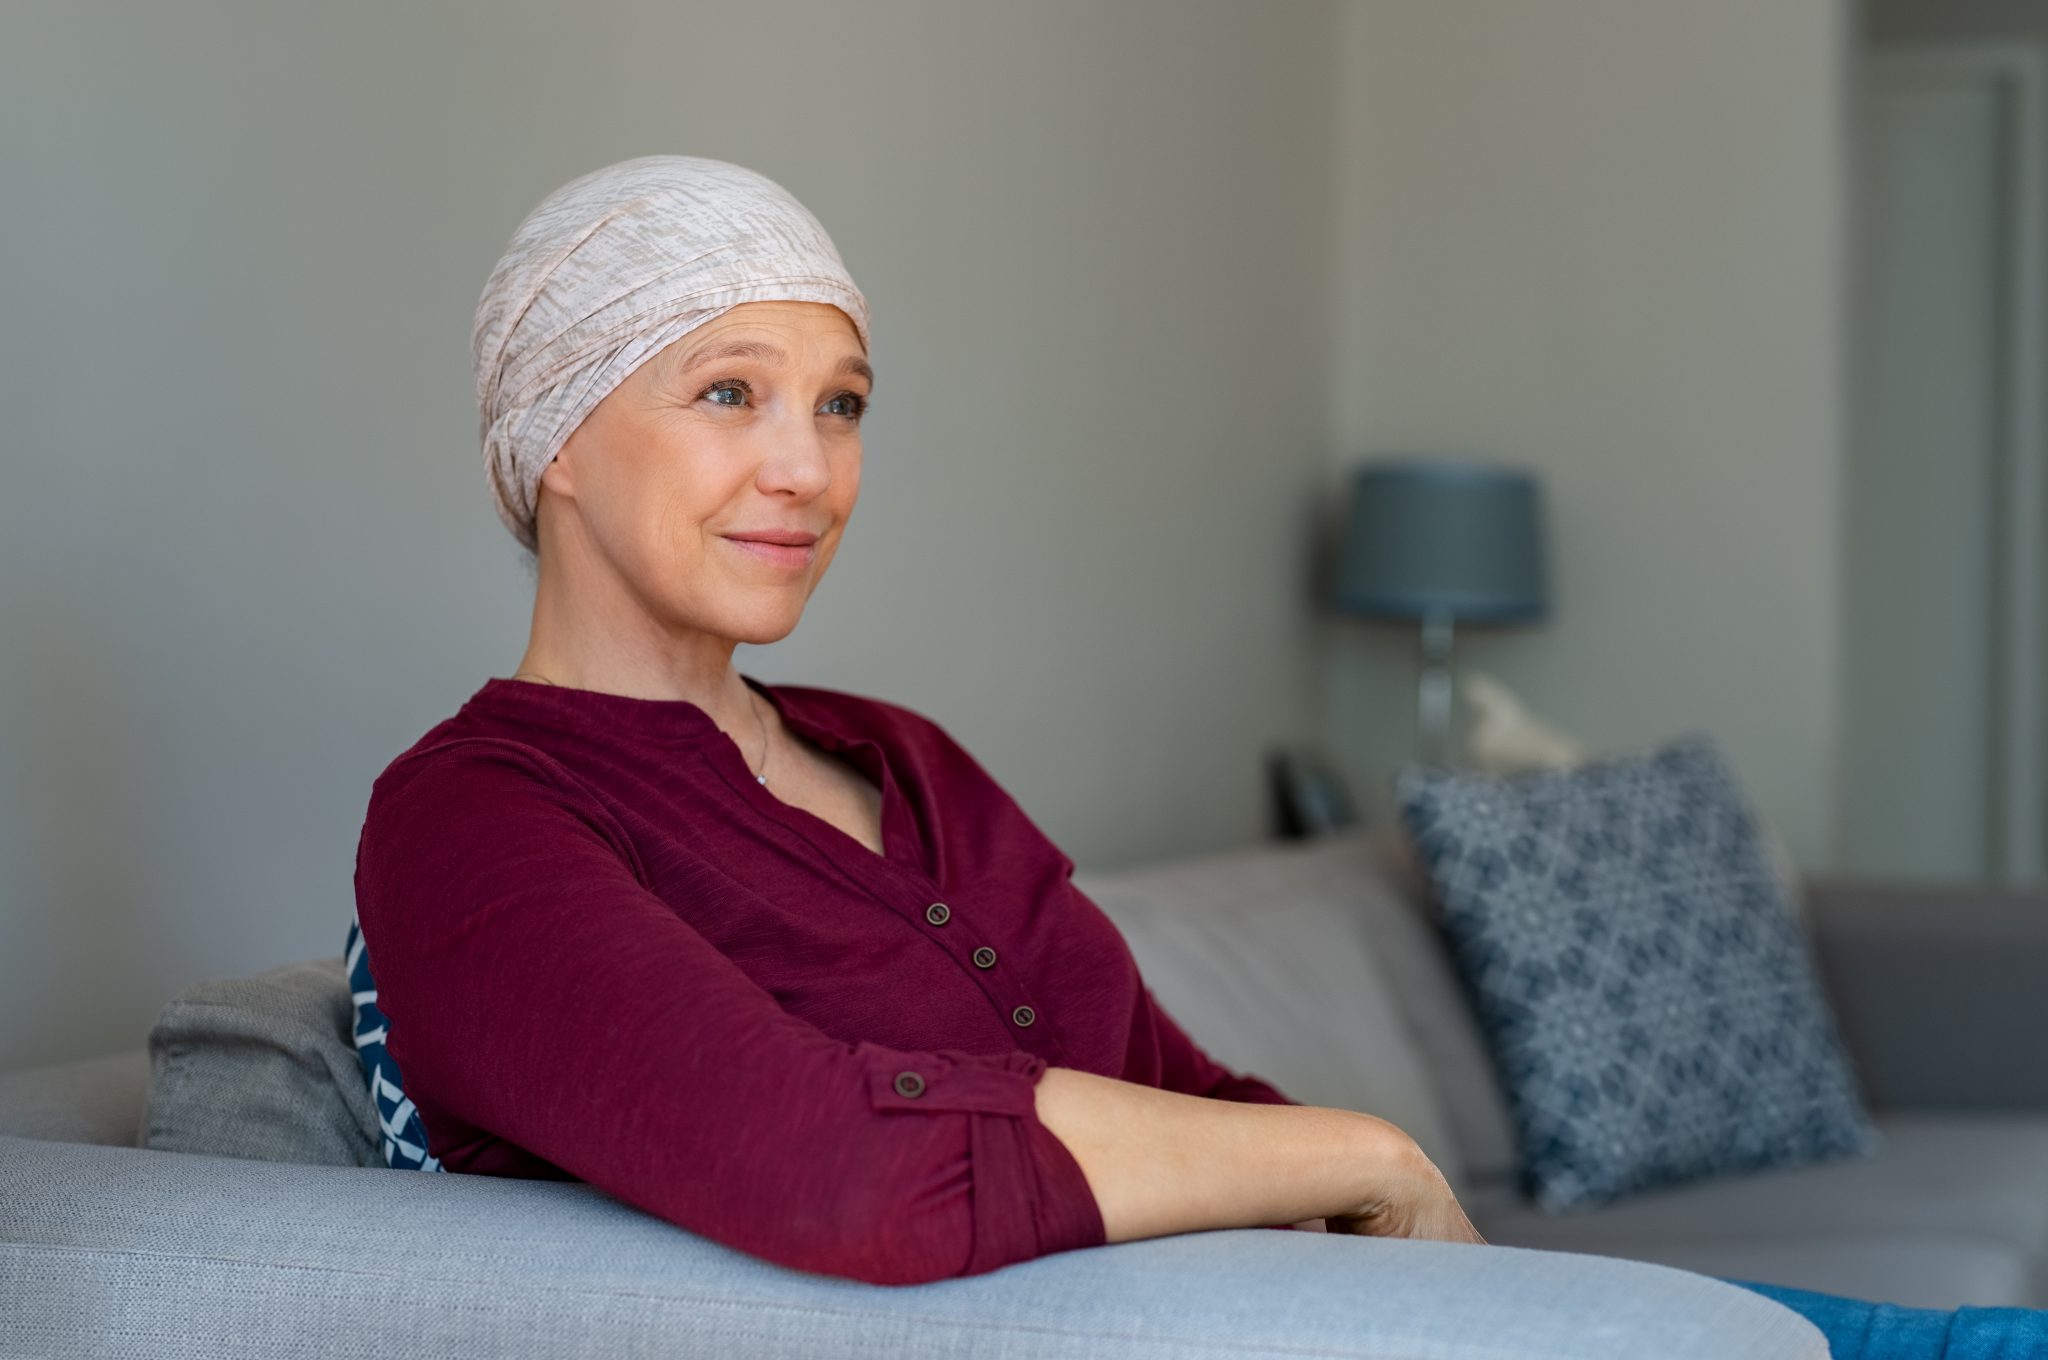 Woman with cancer wearing a headcovering